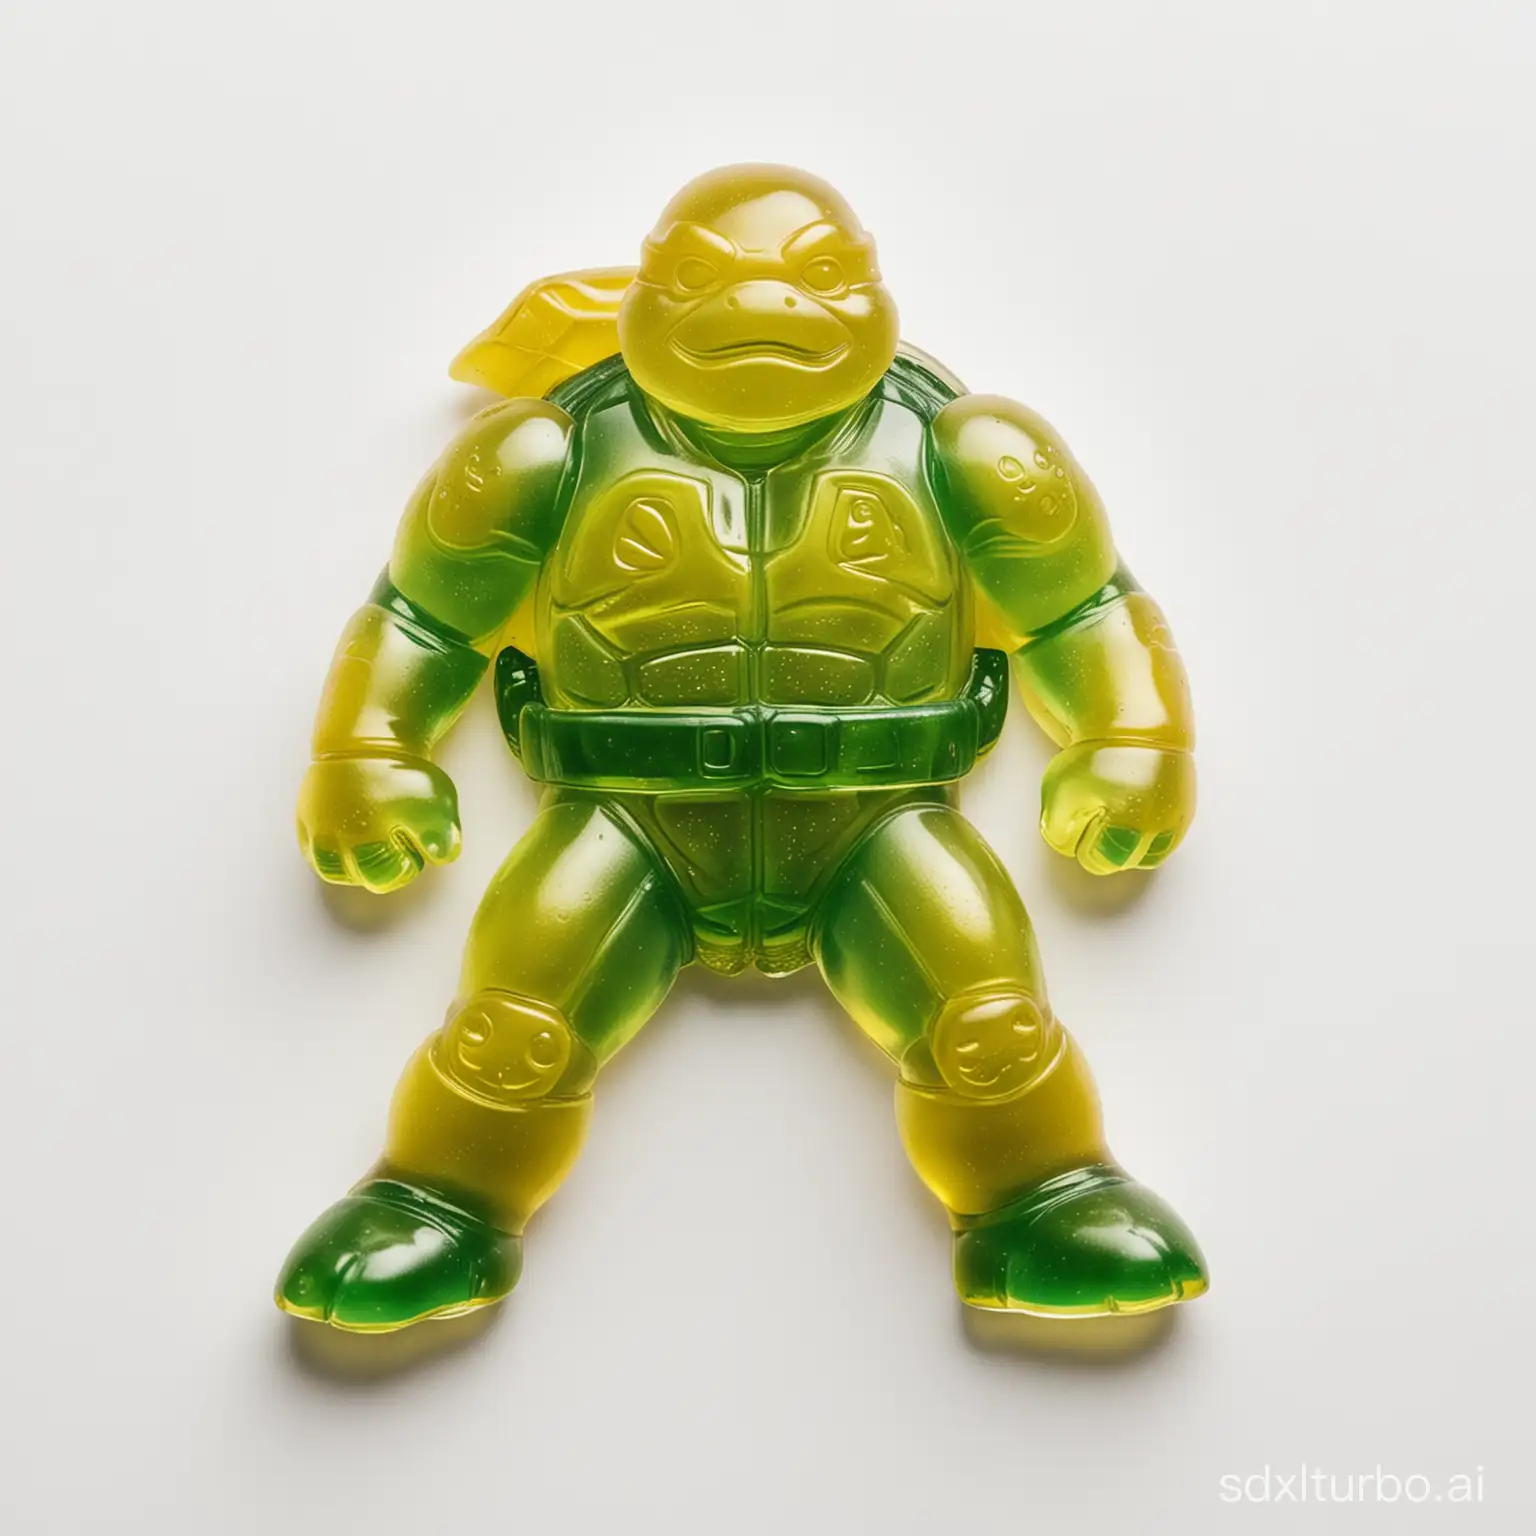 A translucent gummy in the shape of a Teenage Mutant Ninja Turtle, featuring primarily green and yellow colors. Photographed from a top-down perspective against a pure white background.